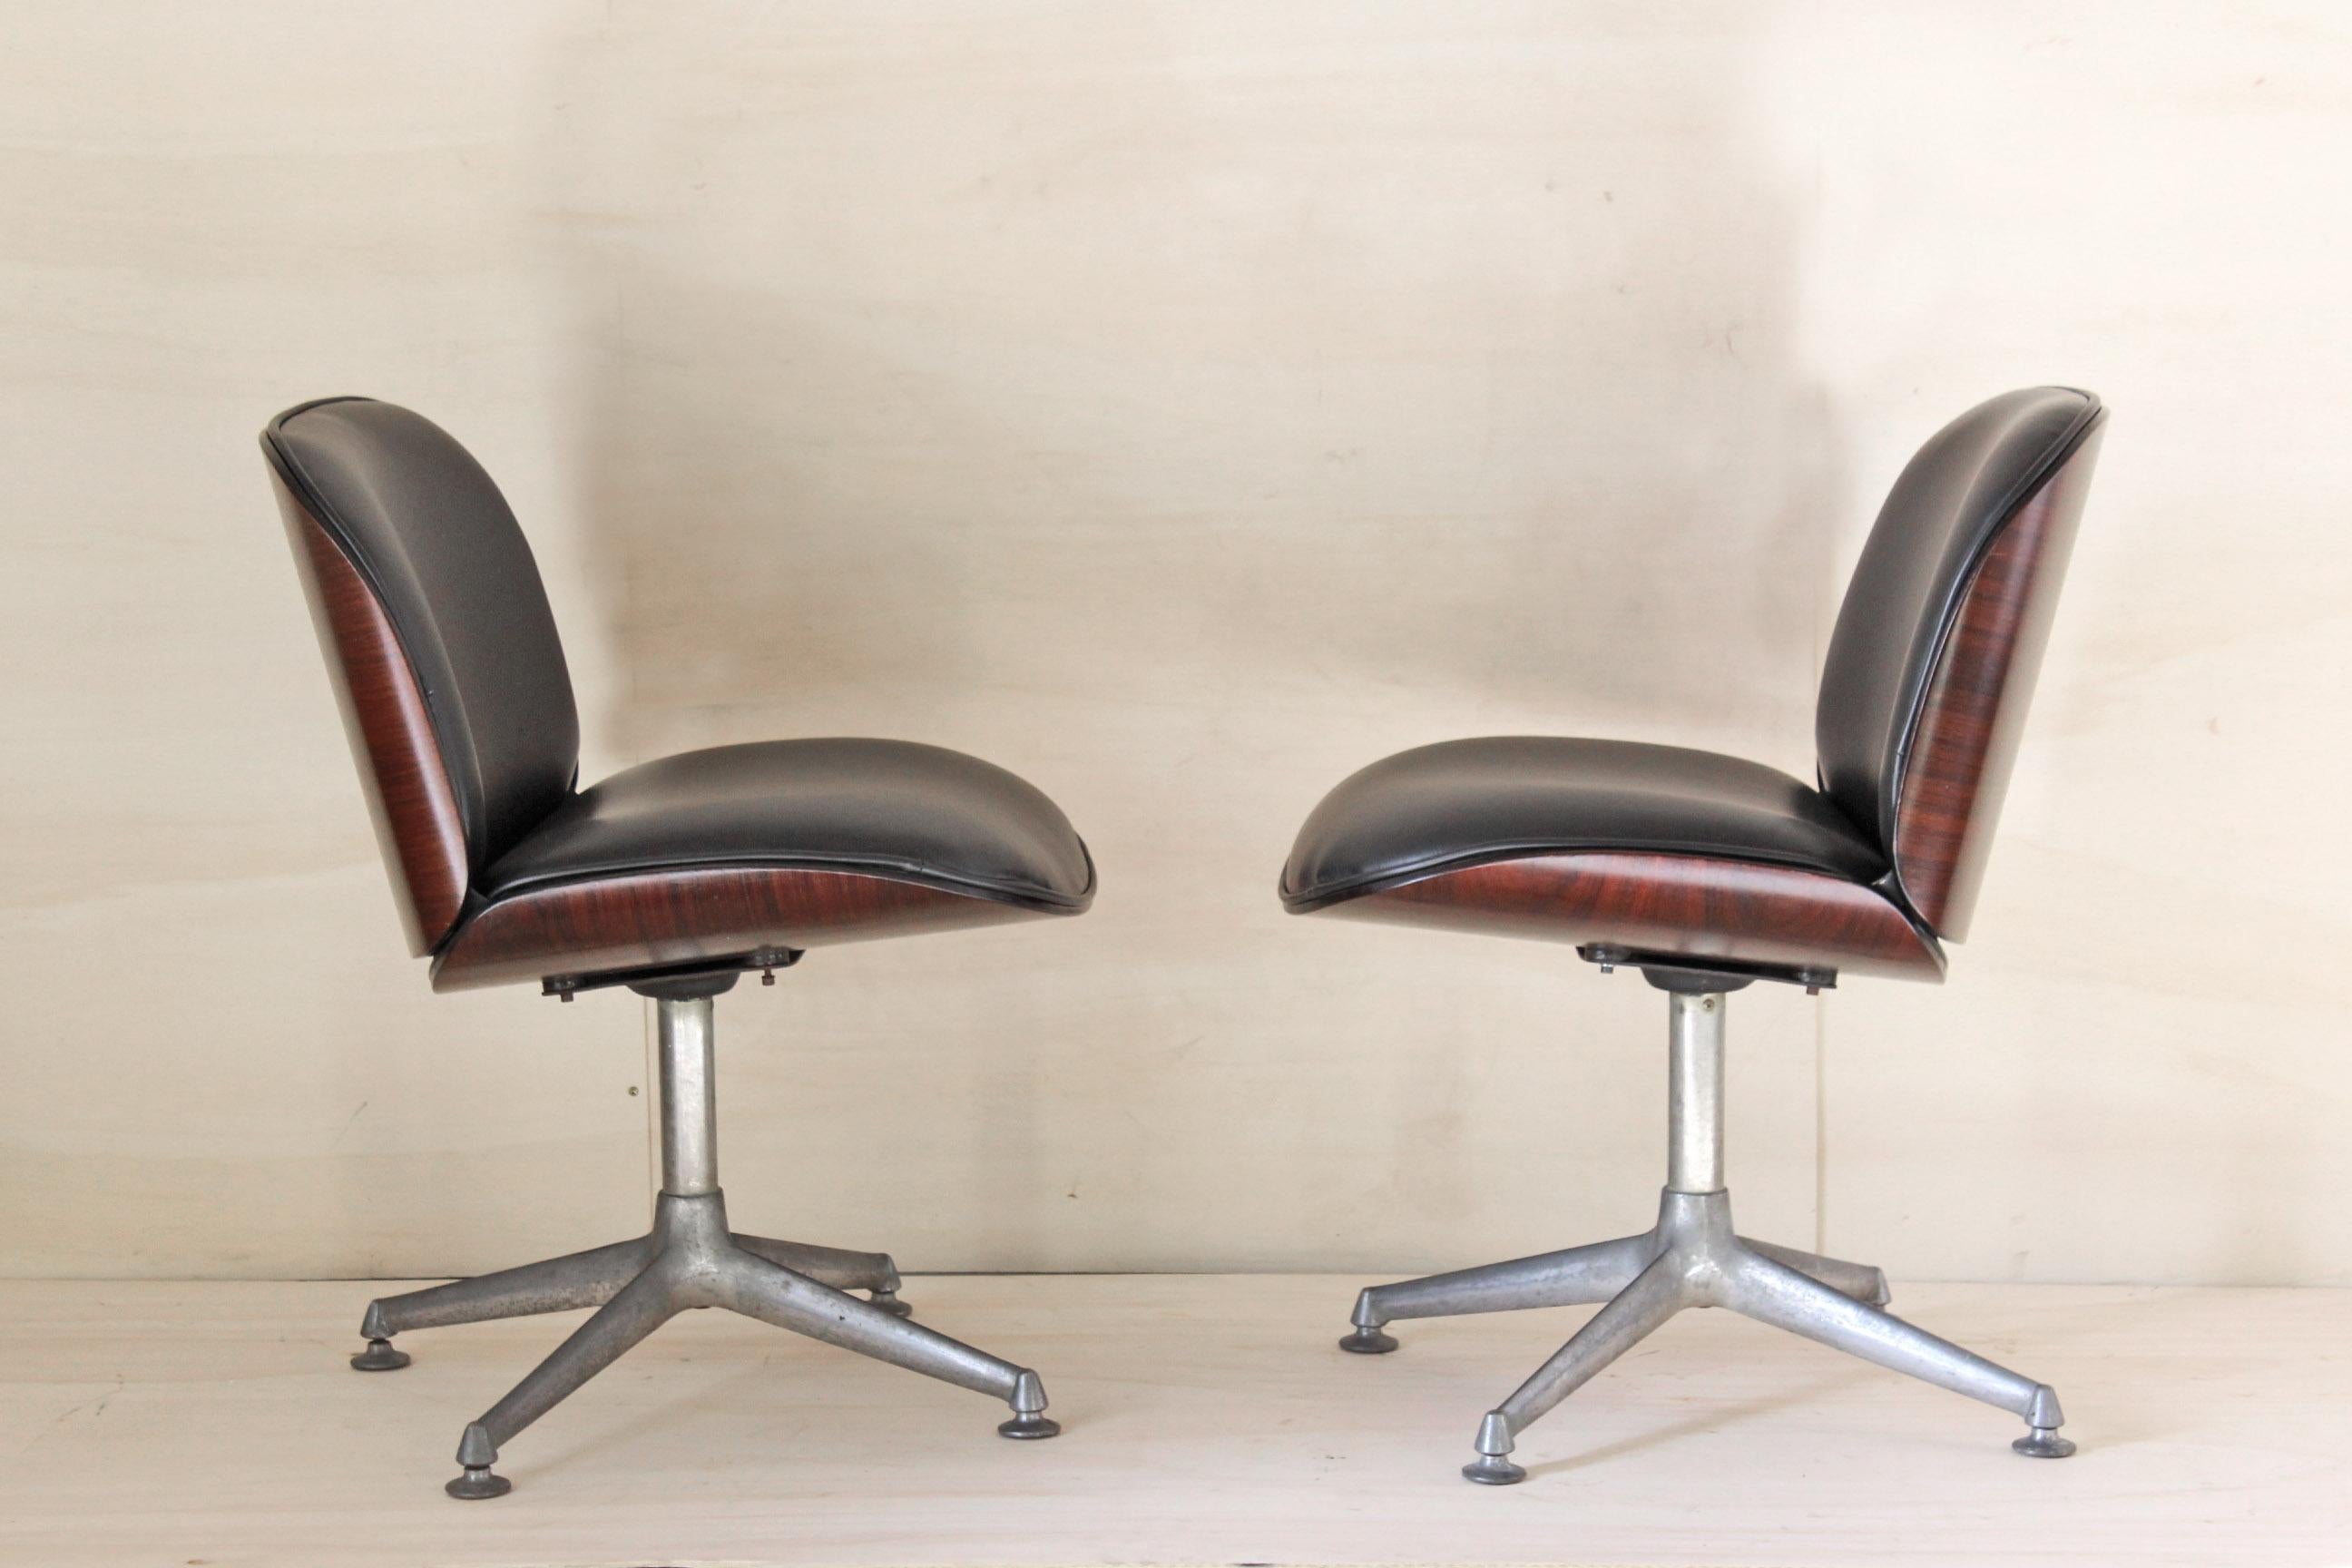 Set of two desk vintage armchairs. Designed by Italian design icon ICO Parisi for MIM Roma ltd in the 1960s. Leather seat, rosenwood structure and steel base. In excellent conditions with only few signs of time.